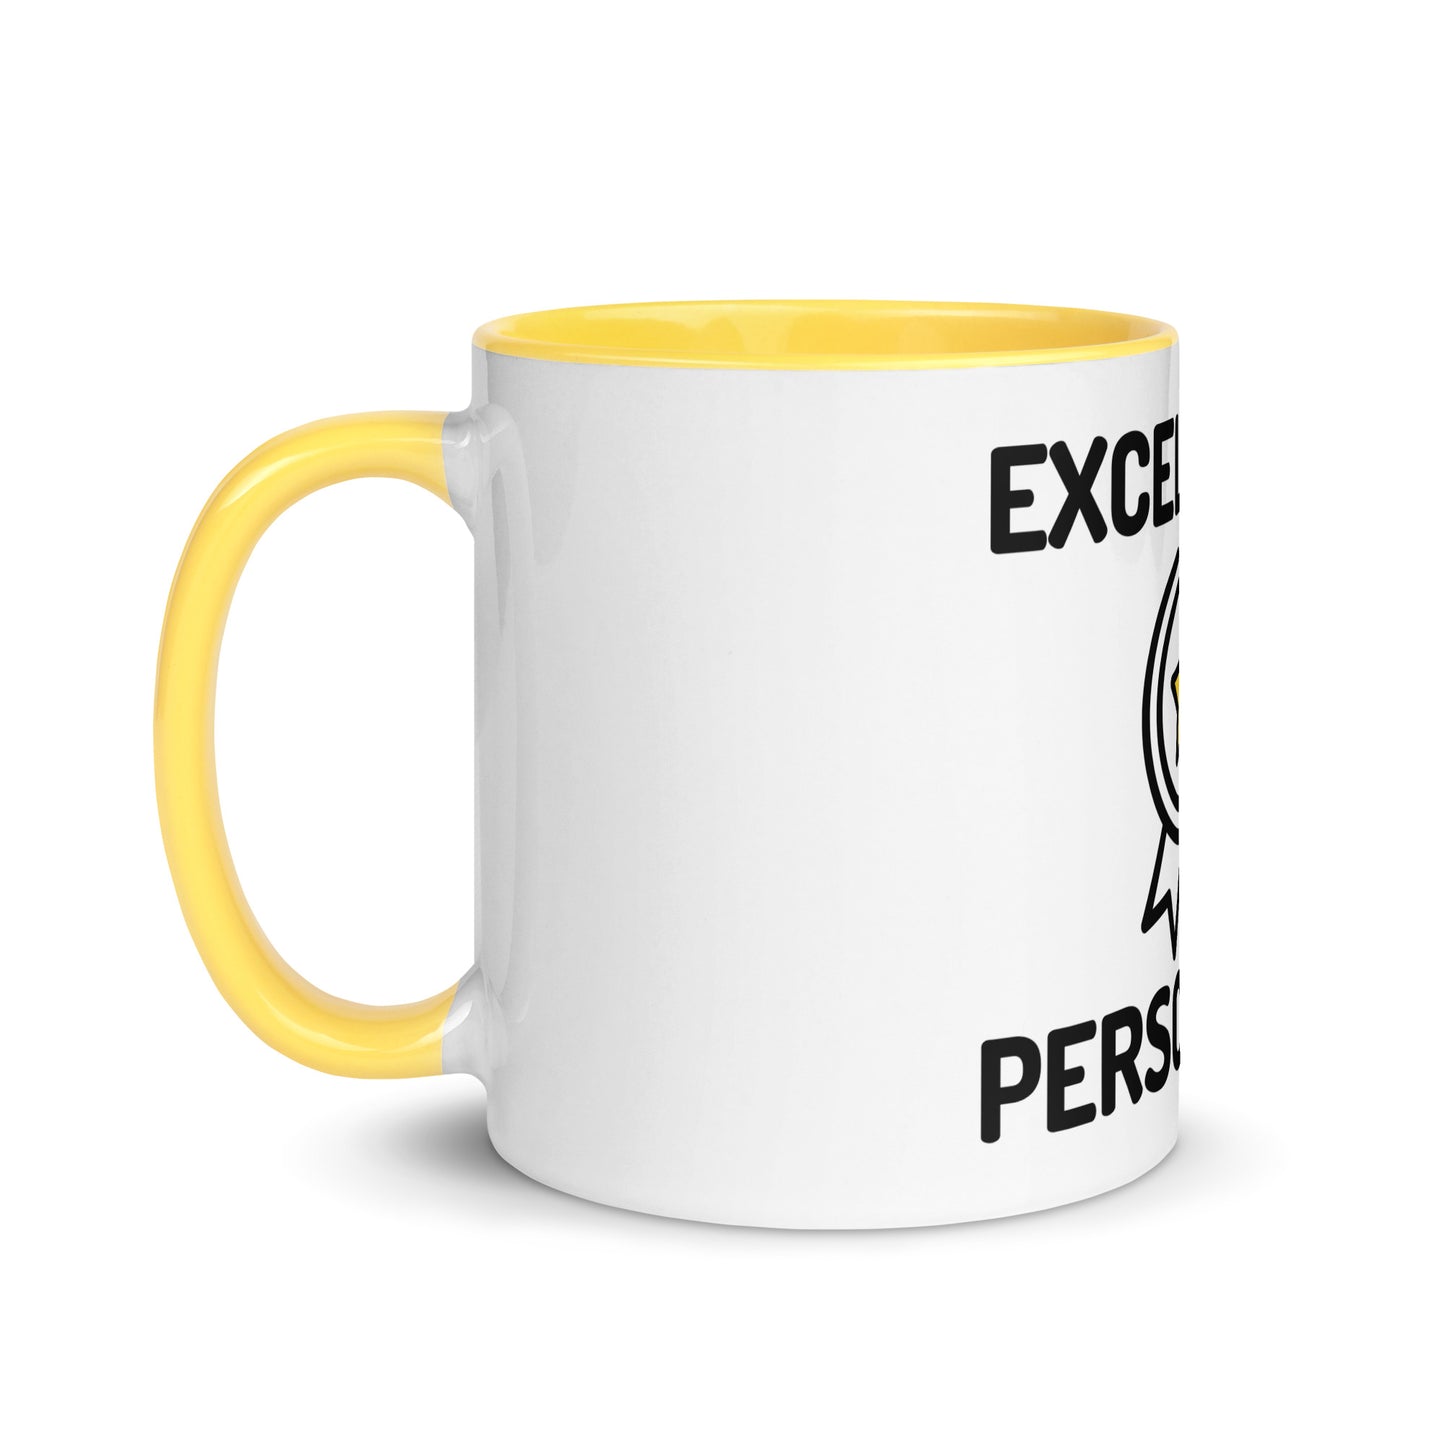 “Excellence Personified” Mug - Mug - Inspired by Change